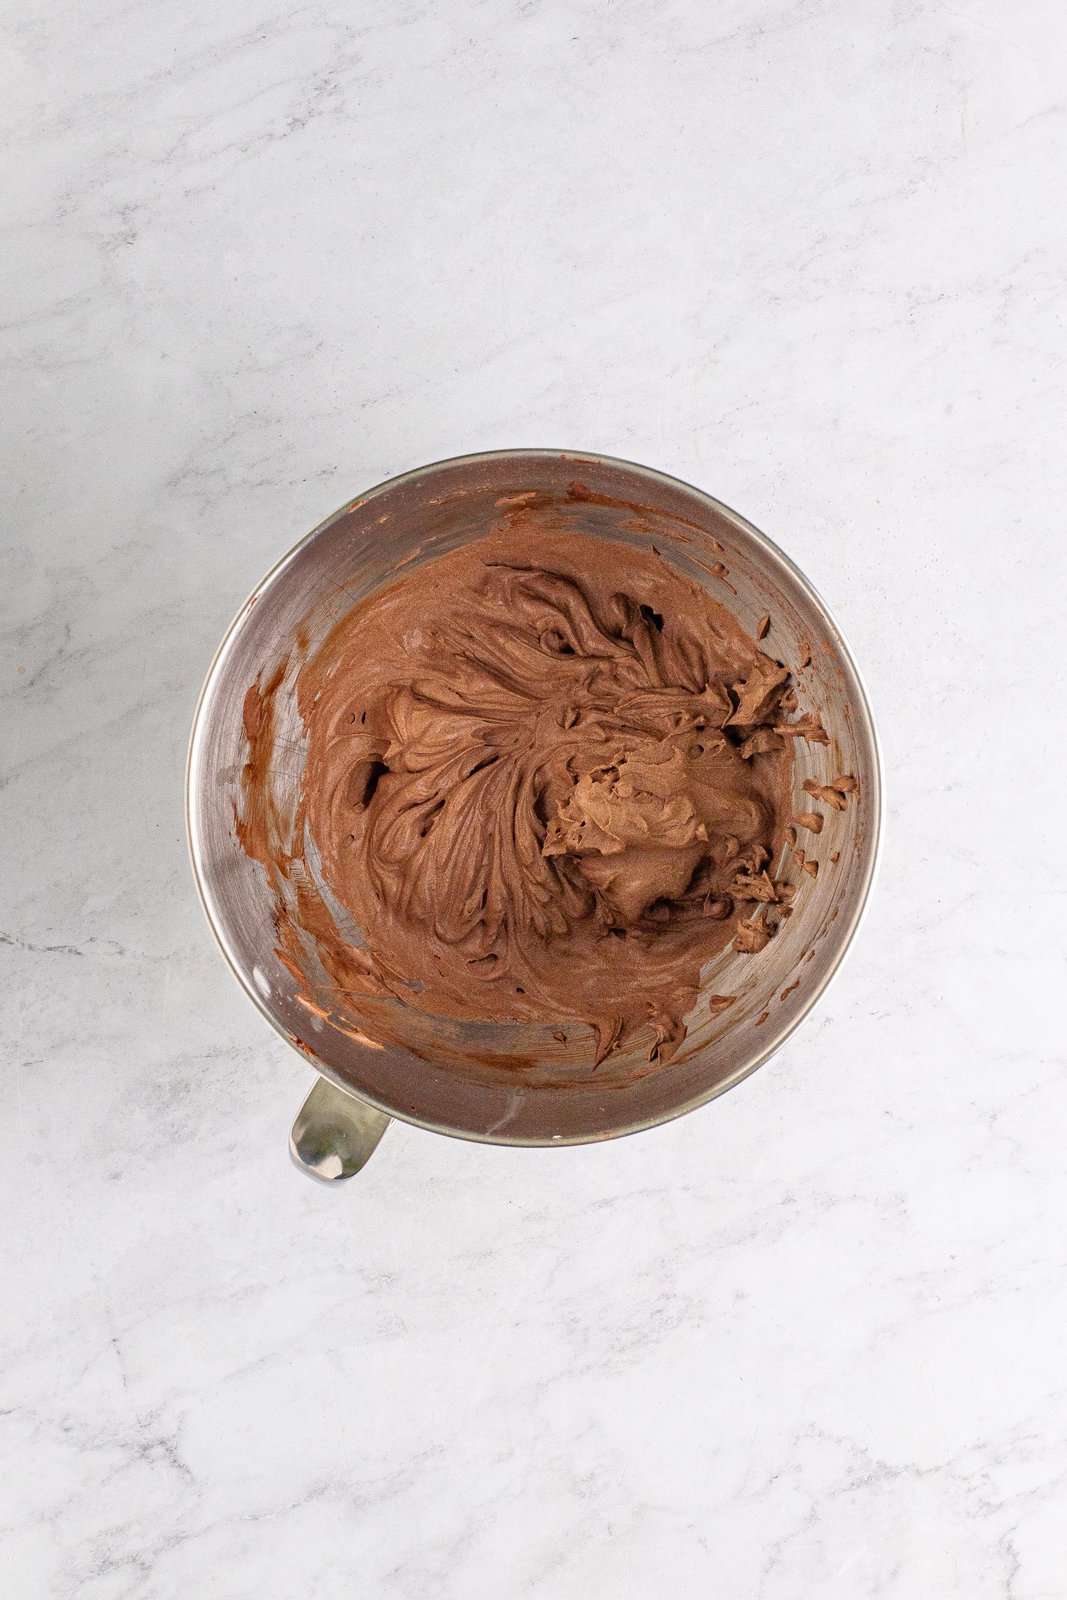 Finished chocolate whipped cream mixture beaten to stiff peaks in stand mixer bowl.